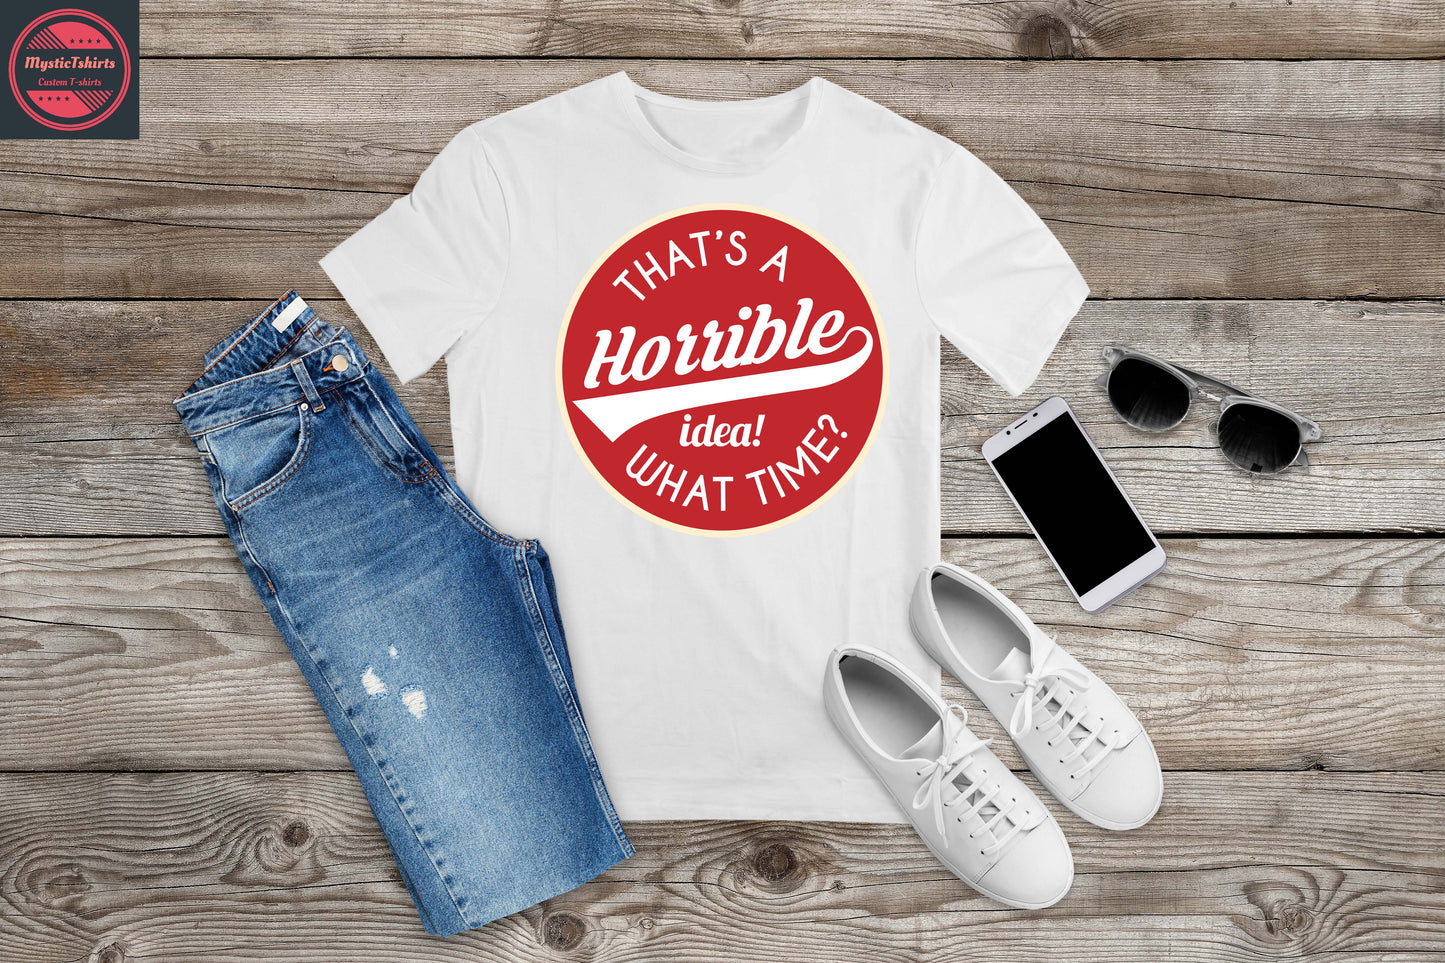 447. THAT'S A HORRIBLE IDEA! WHAT TIME?, Custom Made Shirt, Personalized T-Shirt, Custom Text, Make Your Own Shirt, Custom Tee